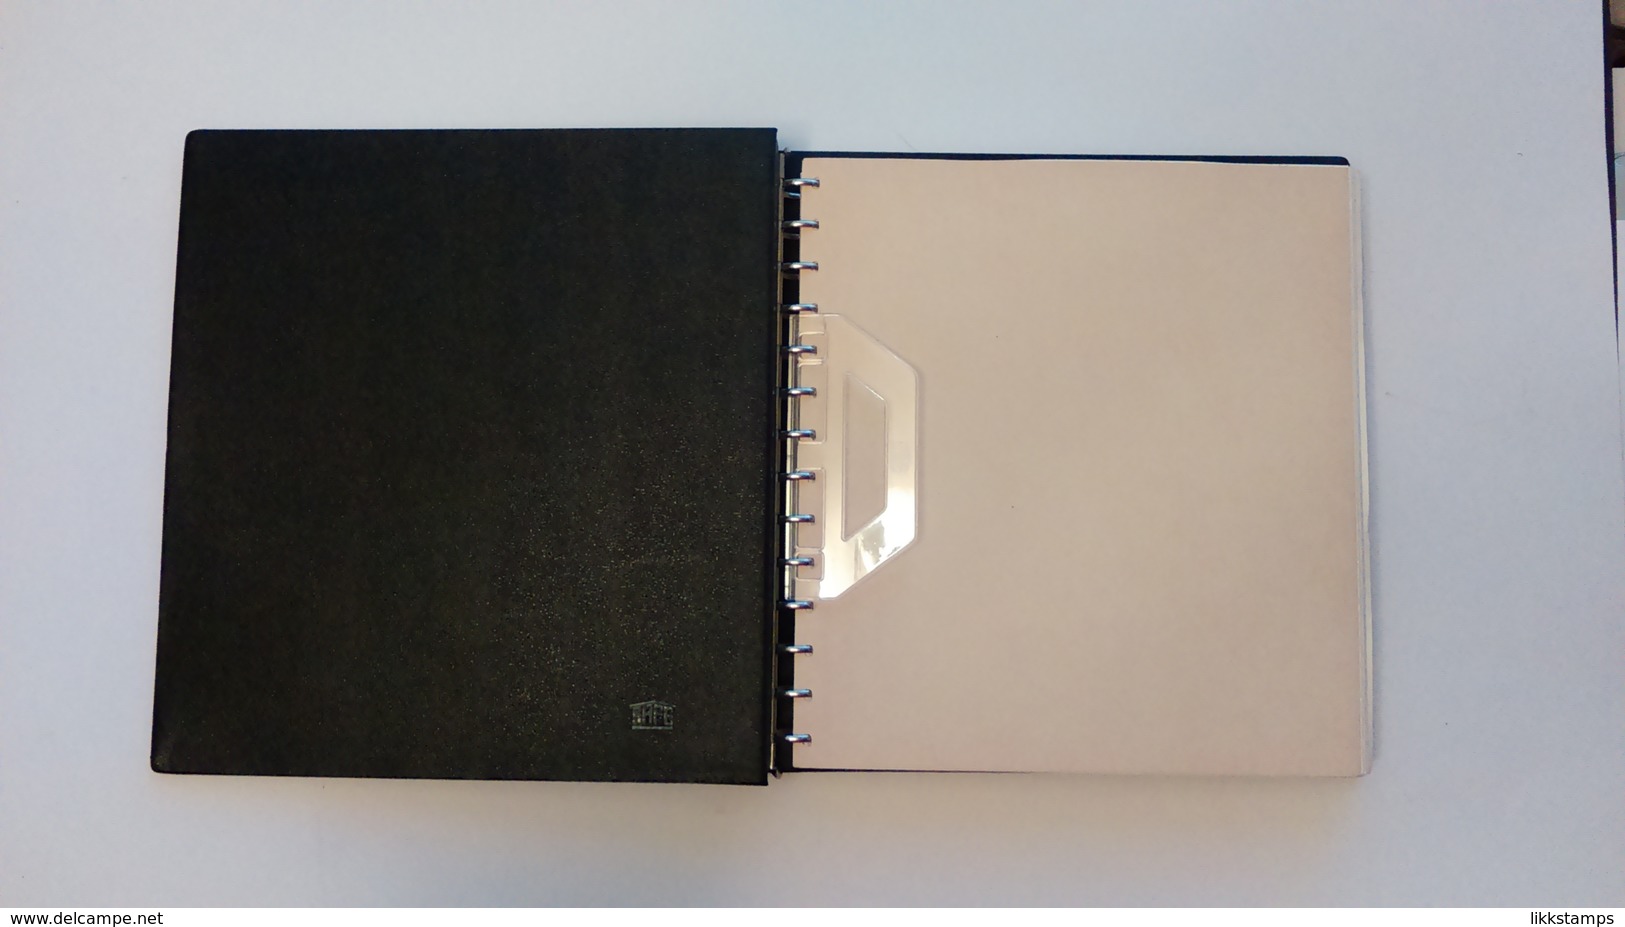 SAFE 14 RING BINDER WITH HINGLESS PAGES FOR EAST GERMANY (D.D.R.) 1969-76 #A00008 (B6) - Binders With Pages